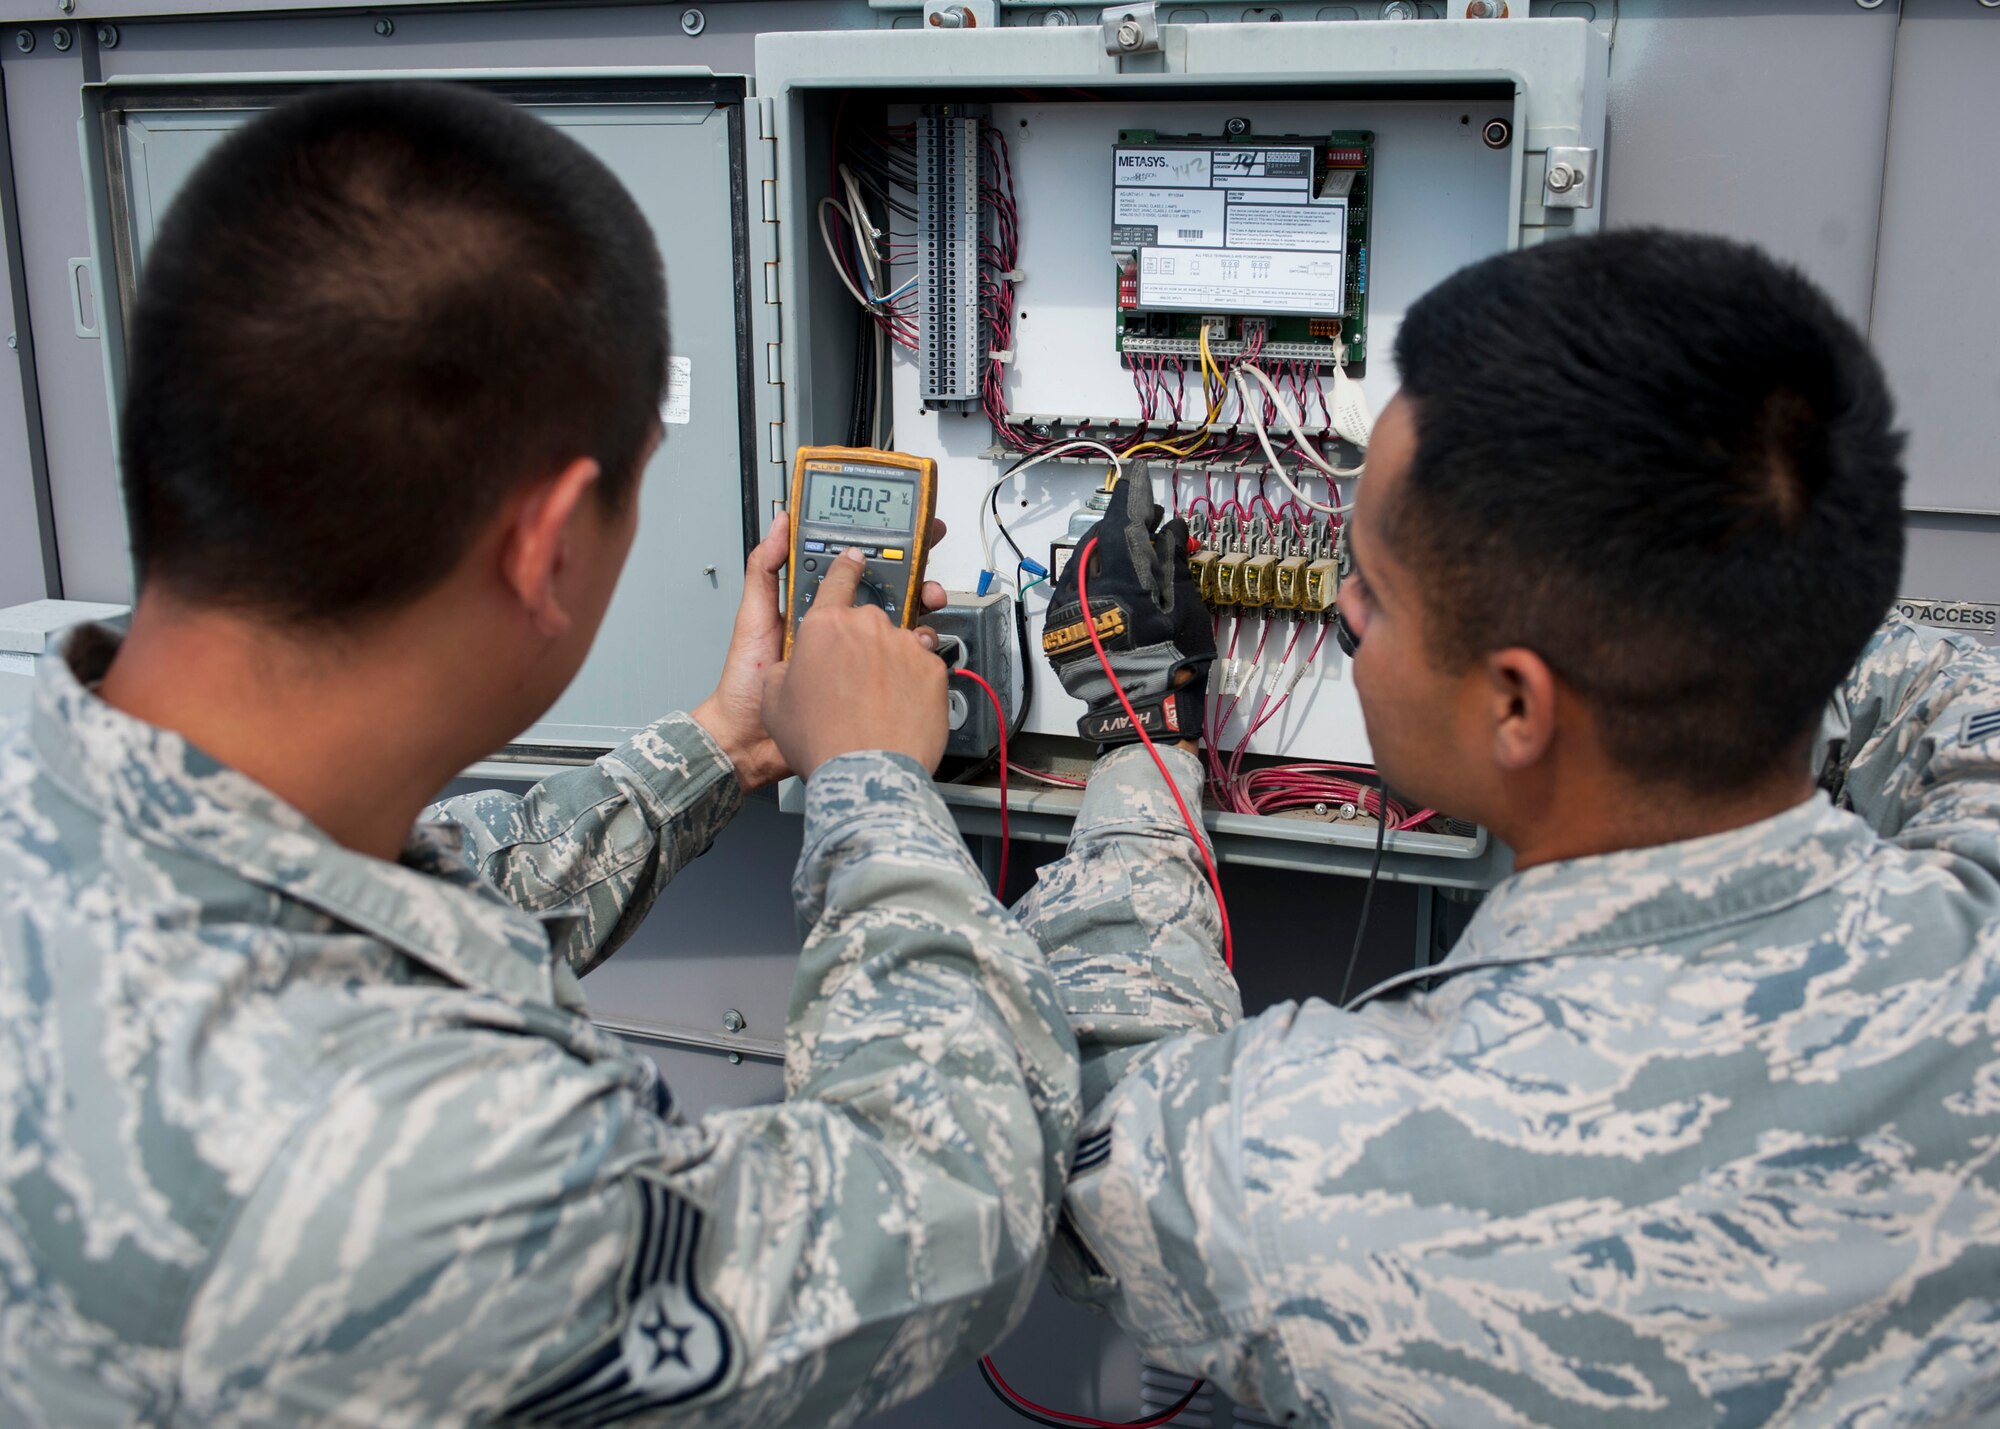 Staff Sgt. Dads Zyron Maniego, 99th Civil Engineer Squadron Heating, Ventilating, and Air Conditioning technician, and Senior Airman Octavio Nila 99th CES HVAC technician, check readings on an A/C unit atop of the Base Exchange on Nellis Air Force Base, Nev., June 28, 2016. With HVAC Controls only having a little over 30 Airmen able to support the base’s needs, customers may experience wait times when HVAC responds to emergency calls which can include the Base Exchange. 